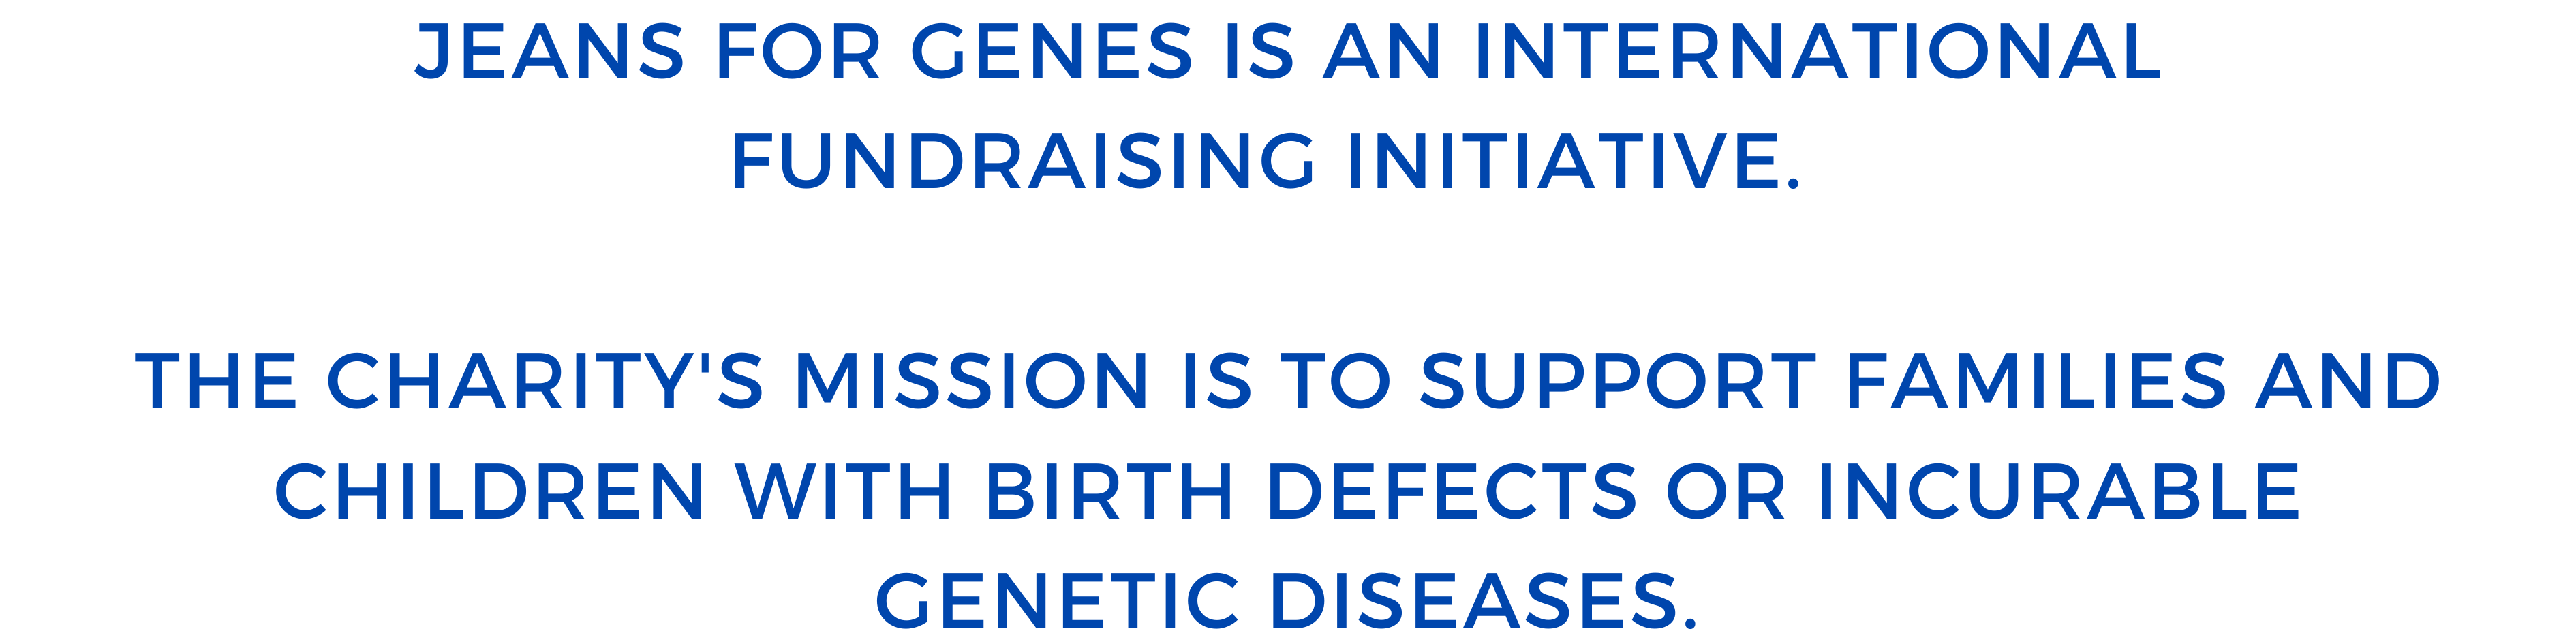 Jeans for Genes are a nationwide fundraising initiative supporting families and children with birth defects or genetic diseases.